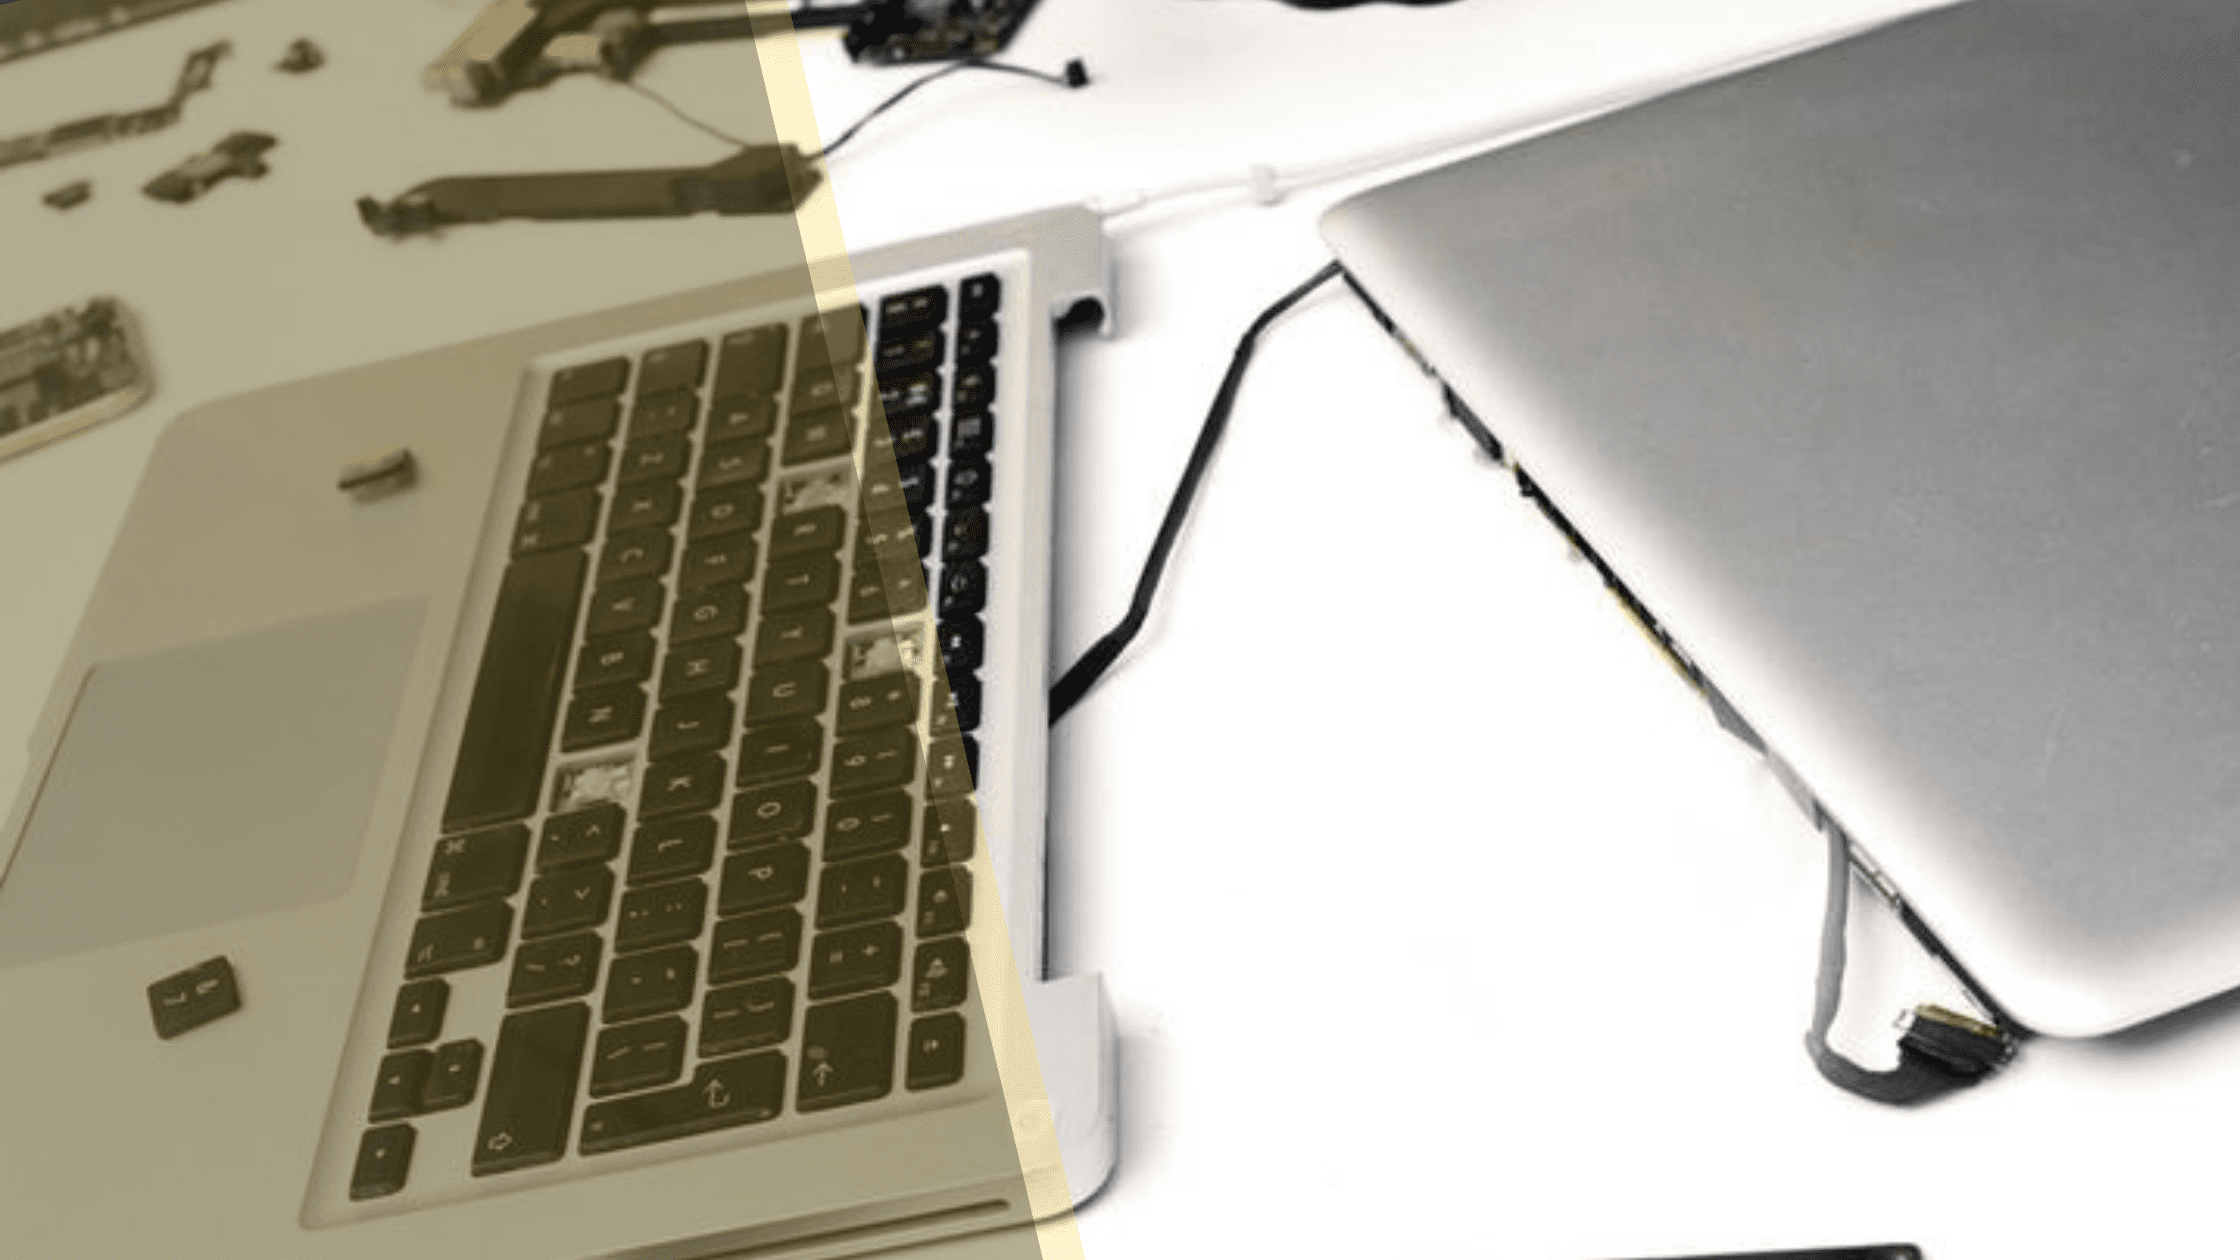 10-Things-We-All-Hate-About-Apple-New-Fix-It-Policy-Is-Not-The-End-For-‘Right-To-Repair